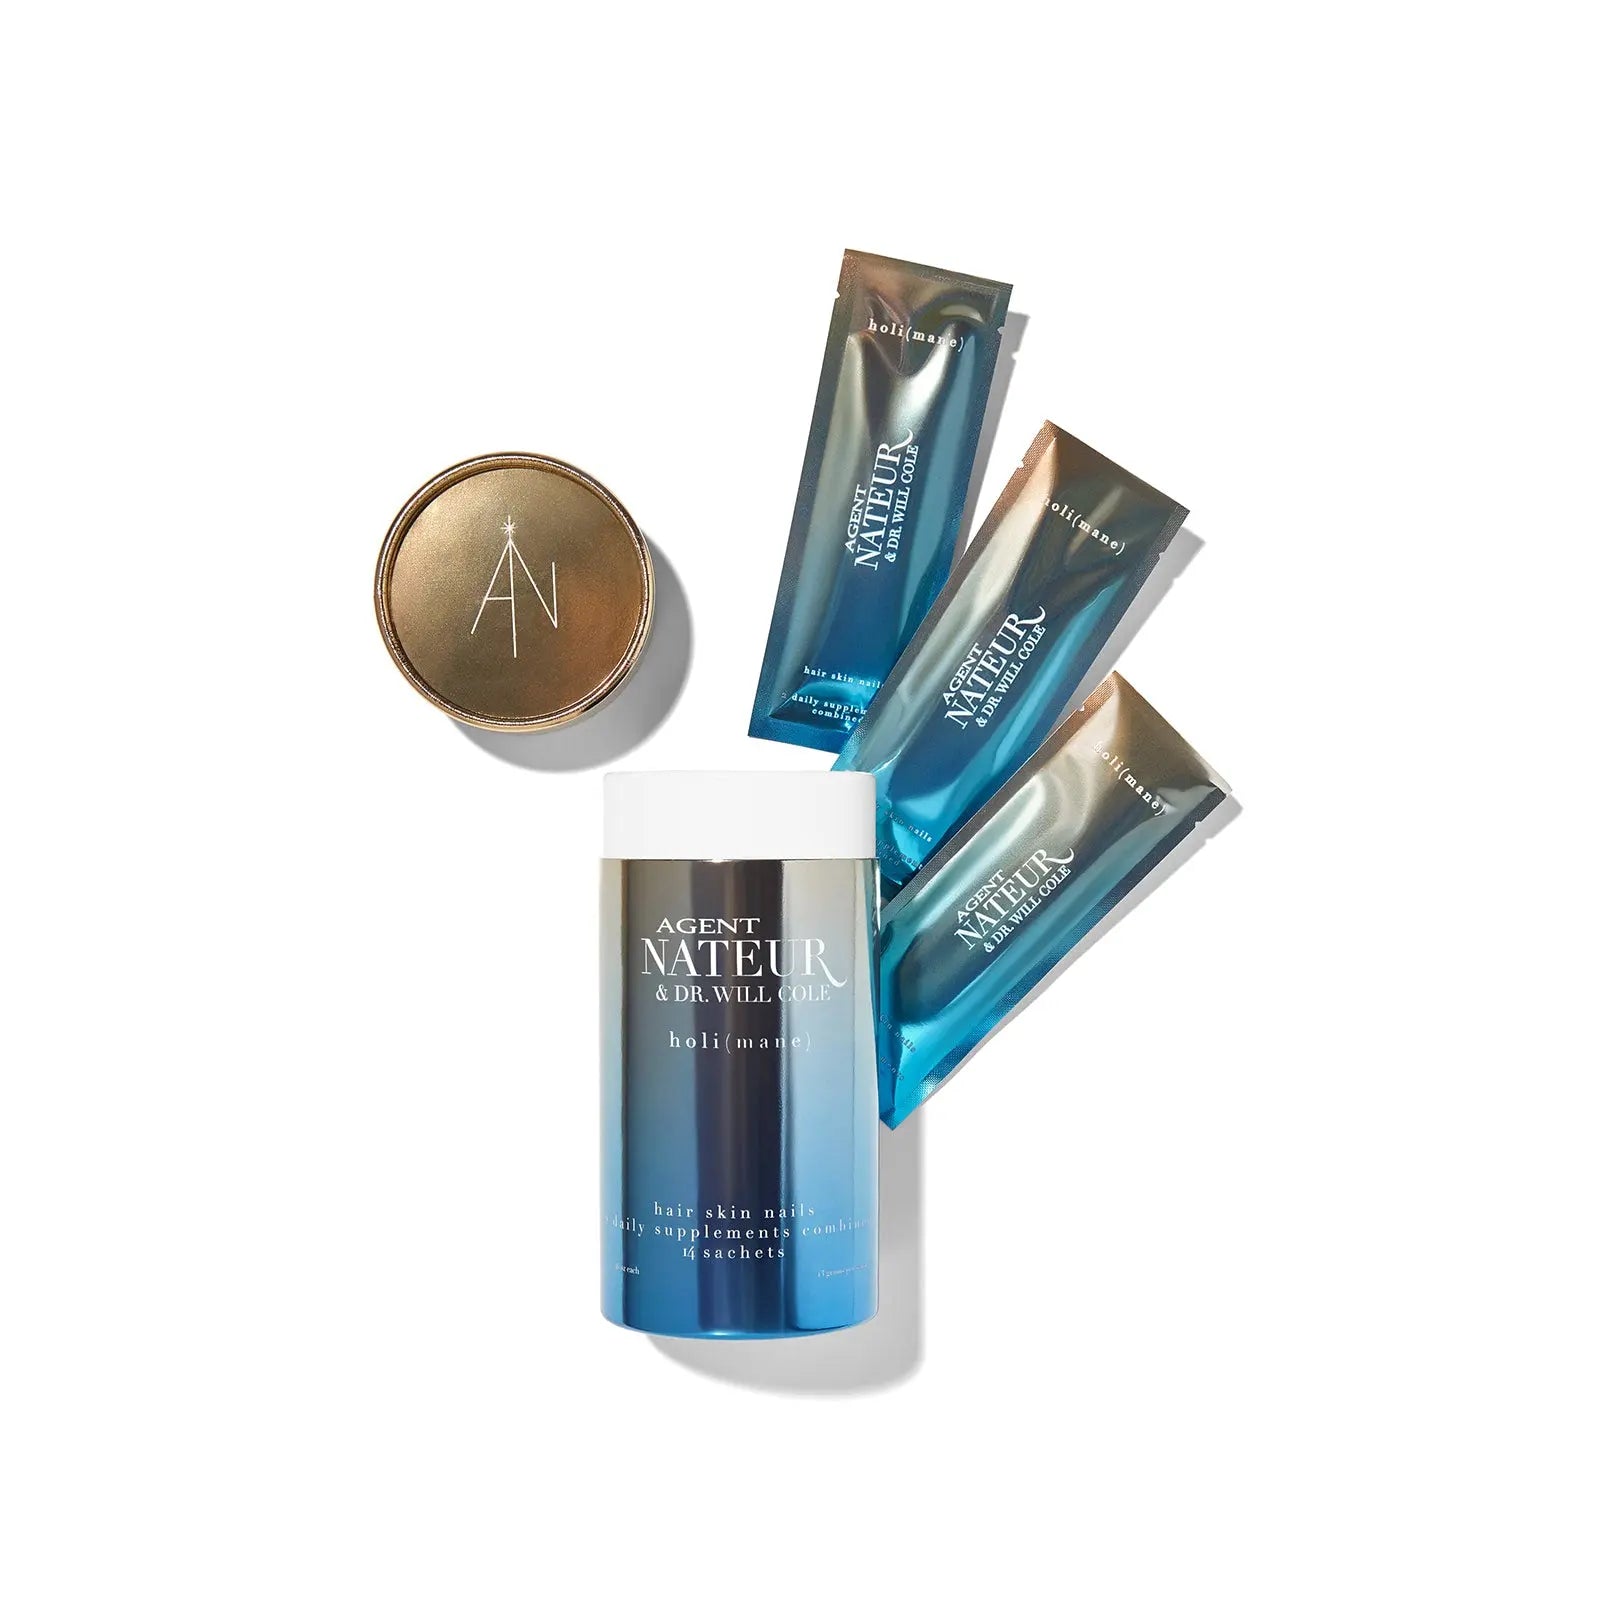 Agent Nateur | h o l i (Mane) Hair, Skin, Nails, 2 Daily Combined travel 14-day supply